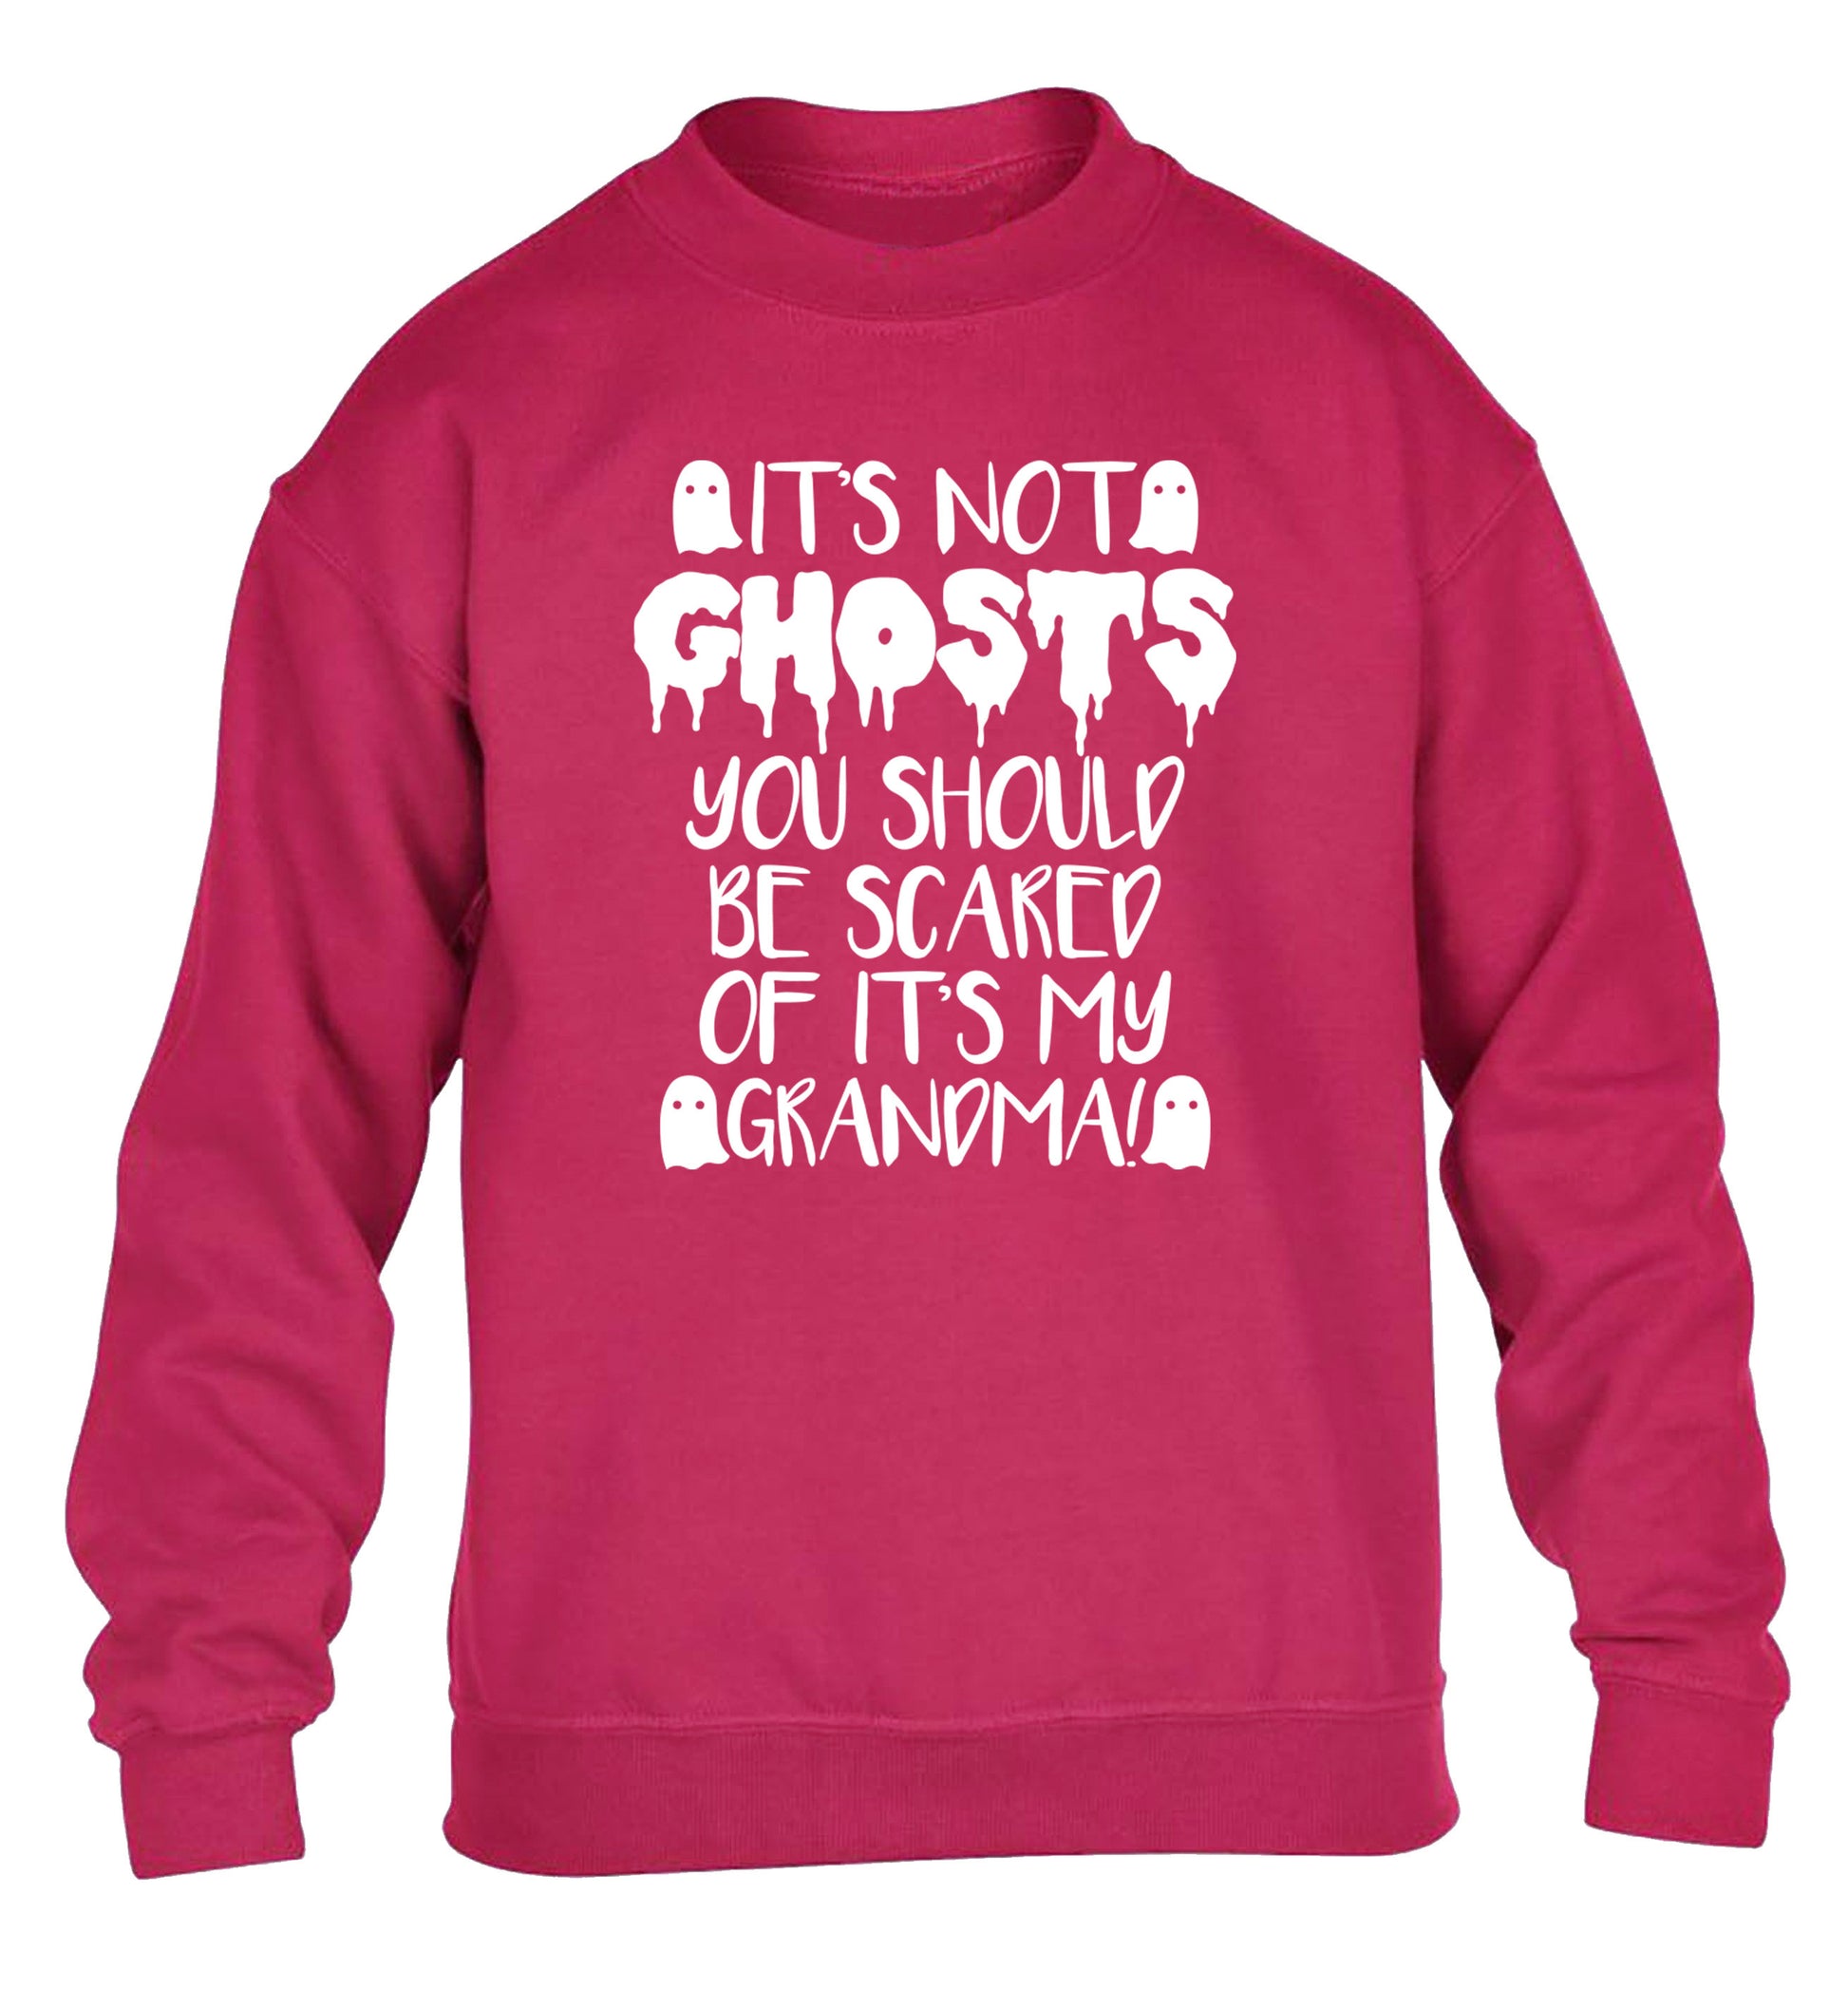 It's not ghosts you should be scared of it's my grandma! children's pink sweater 12-14 Years